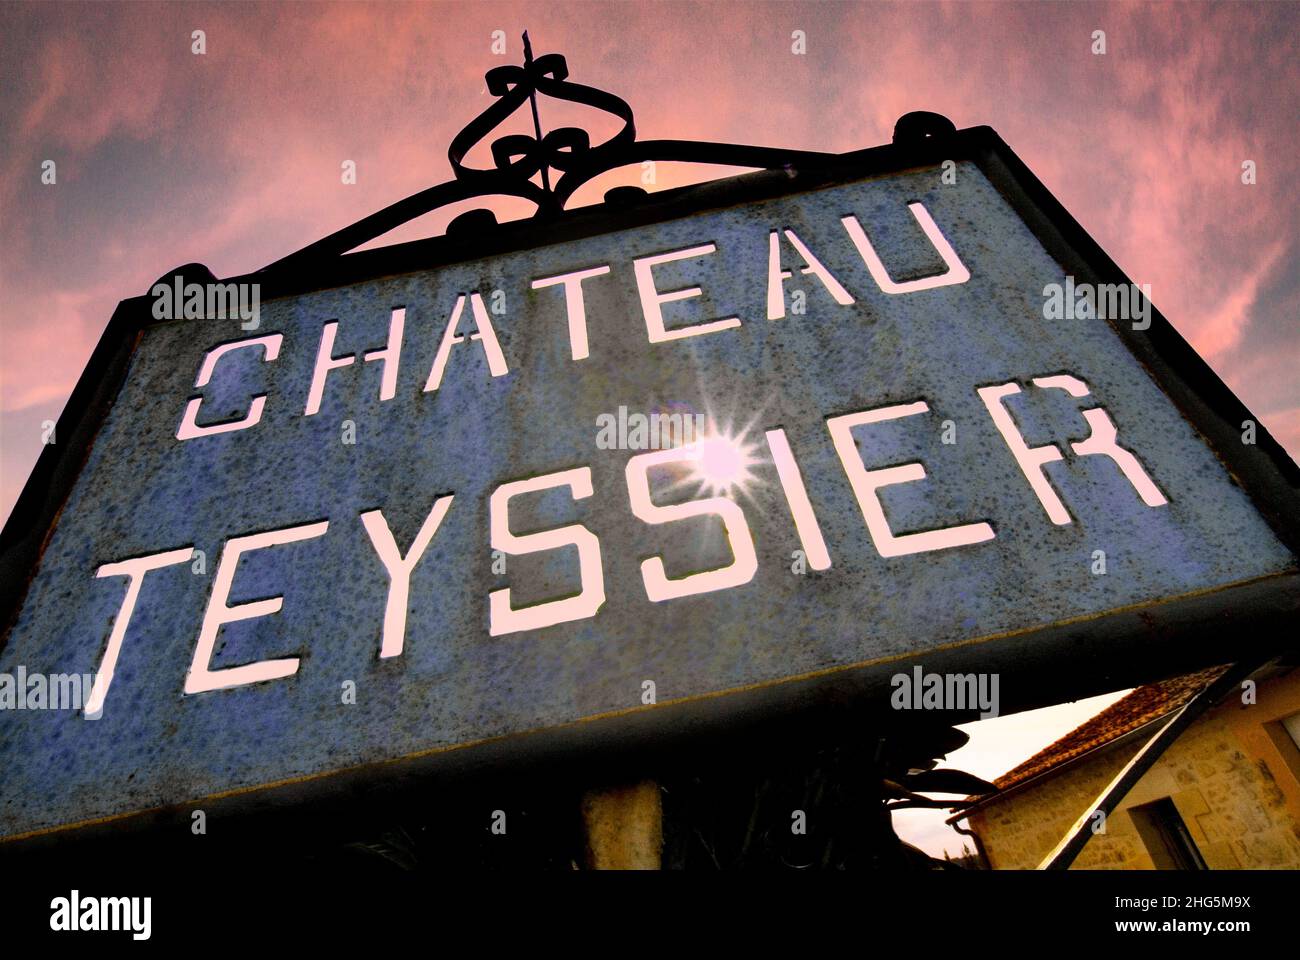 CHATEAU TEYSSIER Weathered metal plaque with sunburst, at red sunset outside Château Teyssier a Bordeaux wine producer from the appellation Saint Emilion Grand Cru. Metal sign in the vineyard at sunset Chateau Teyssier Vigonet Saint Emilion Gironde France Stock Photo